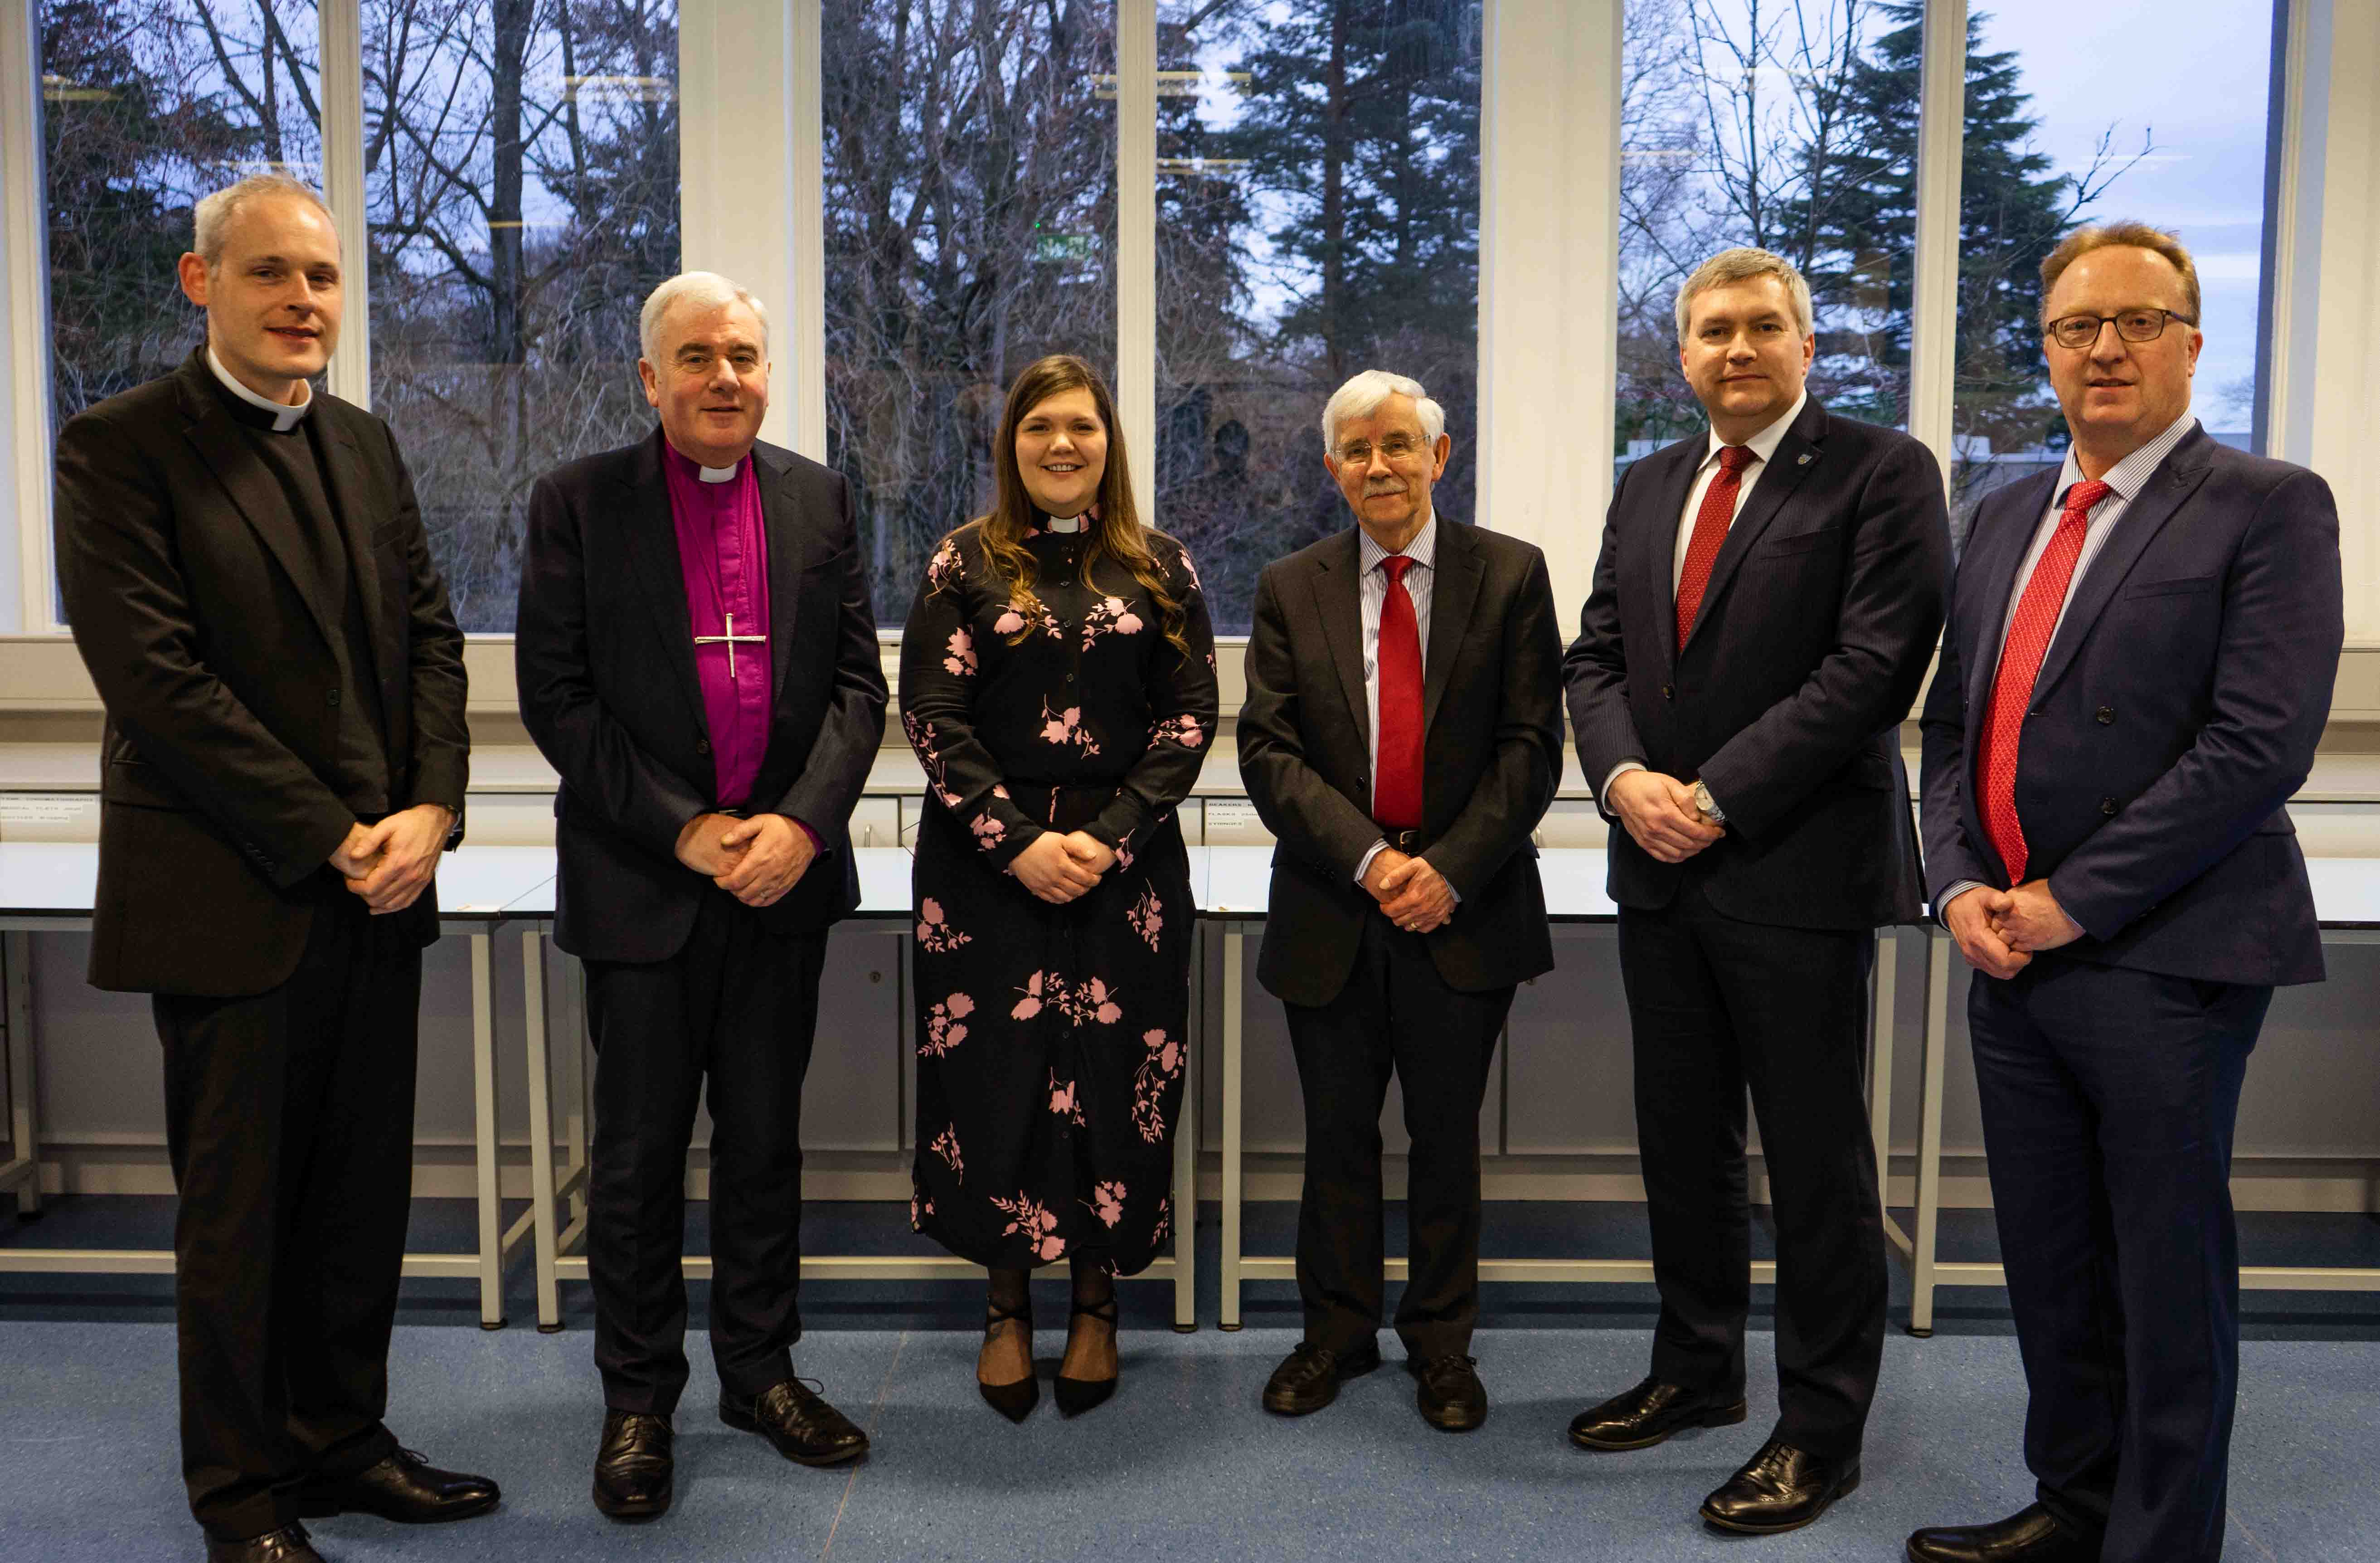 From left: Fr Dominic McGrattan, Catholic Chaplain at Queen's; Bishop David McClay; the Revd Danielle McCullagh, Church of Ireland and Methodist Chaplain at Queen's; Professor Cooling; Dr Jonathan Heggarty, Stranmillis University College; and Dr Peter Hamill, Church of Ireland Board of Education (Northern Ireland).